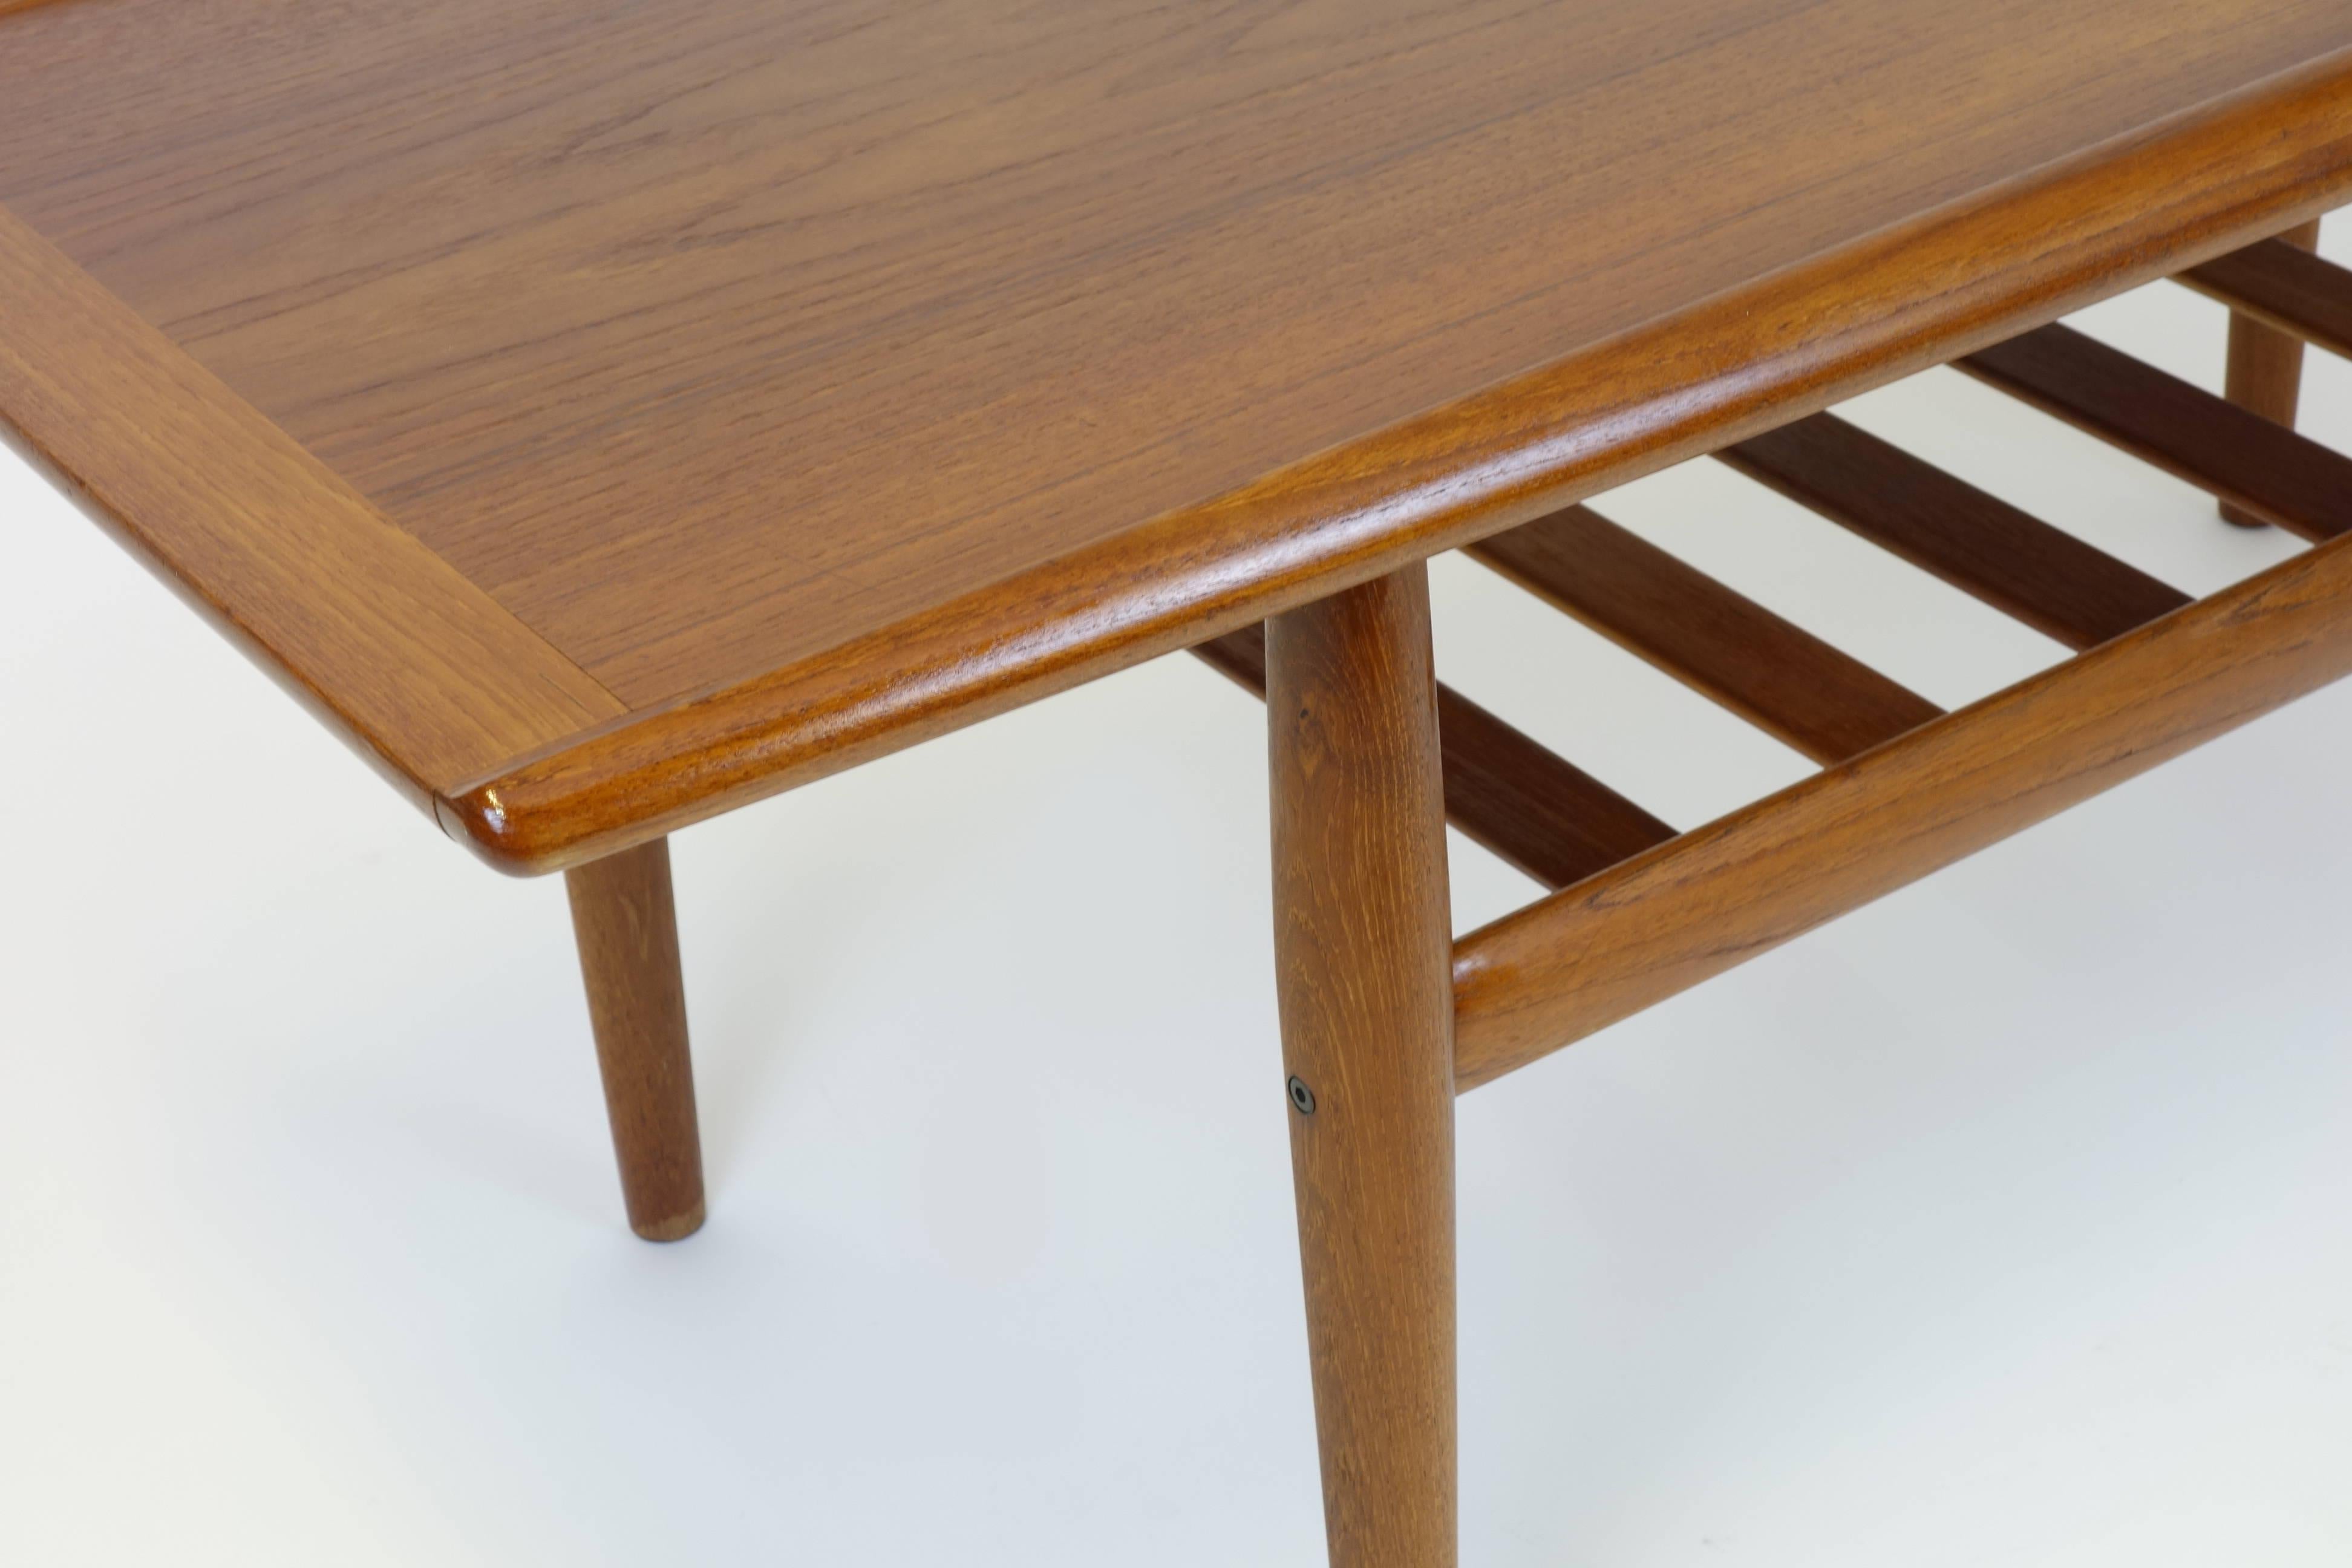 Sidetable original coffeetable by Grete Jalk for Dansk Mobler, Denmark, 1960ies. Completely solid teakwood frame and top. Very refined detailing at the table top with inside curved edges. Inside the table legs lies the rectangular brass inlay as a